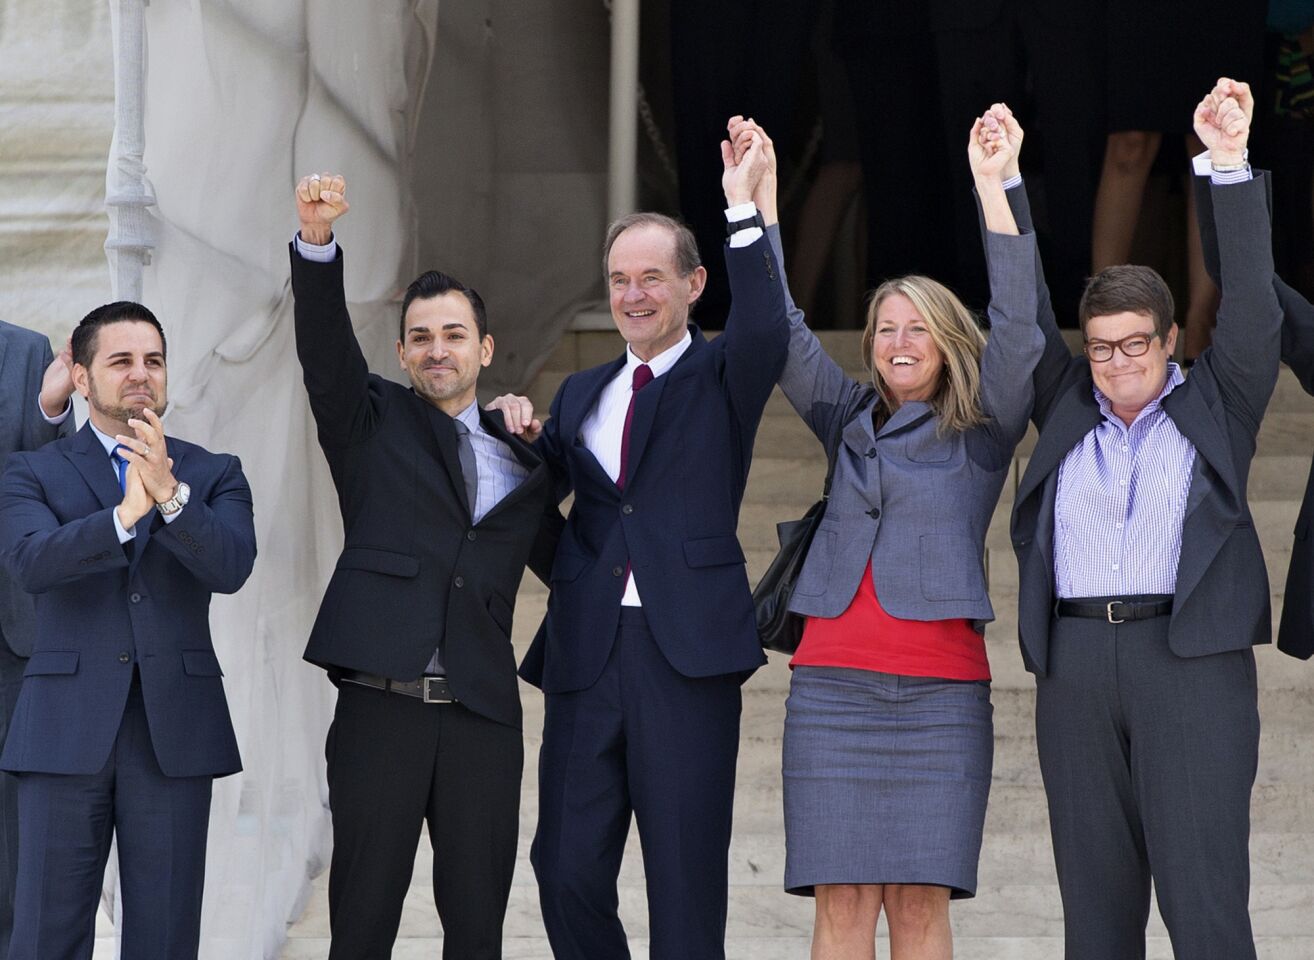 The plaintiffs' team in Hollingsworth vs. Perry, the California Proposition 8 case, celebrate on the steps of the Supreme Court after Wednesday's ruling was handed down. From left are Jeff Zarrillo, his partner, Paul Katami, attorney David Boies, Sandy Stier and her partner, Kris Perry.